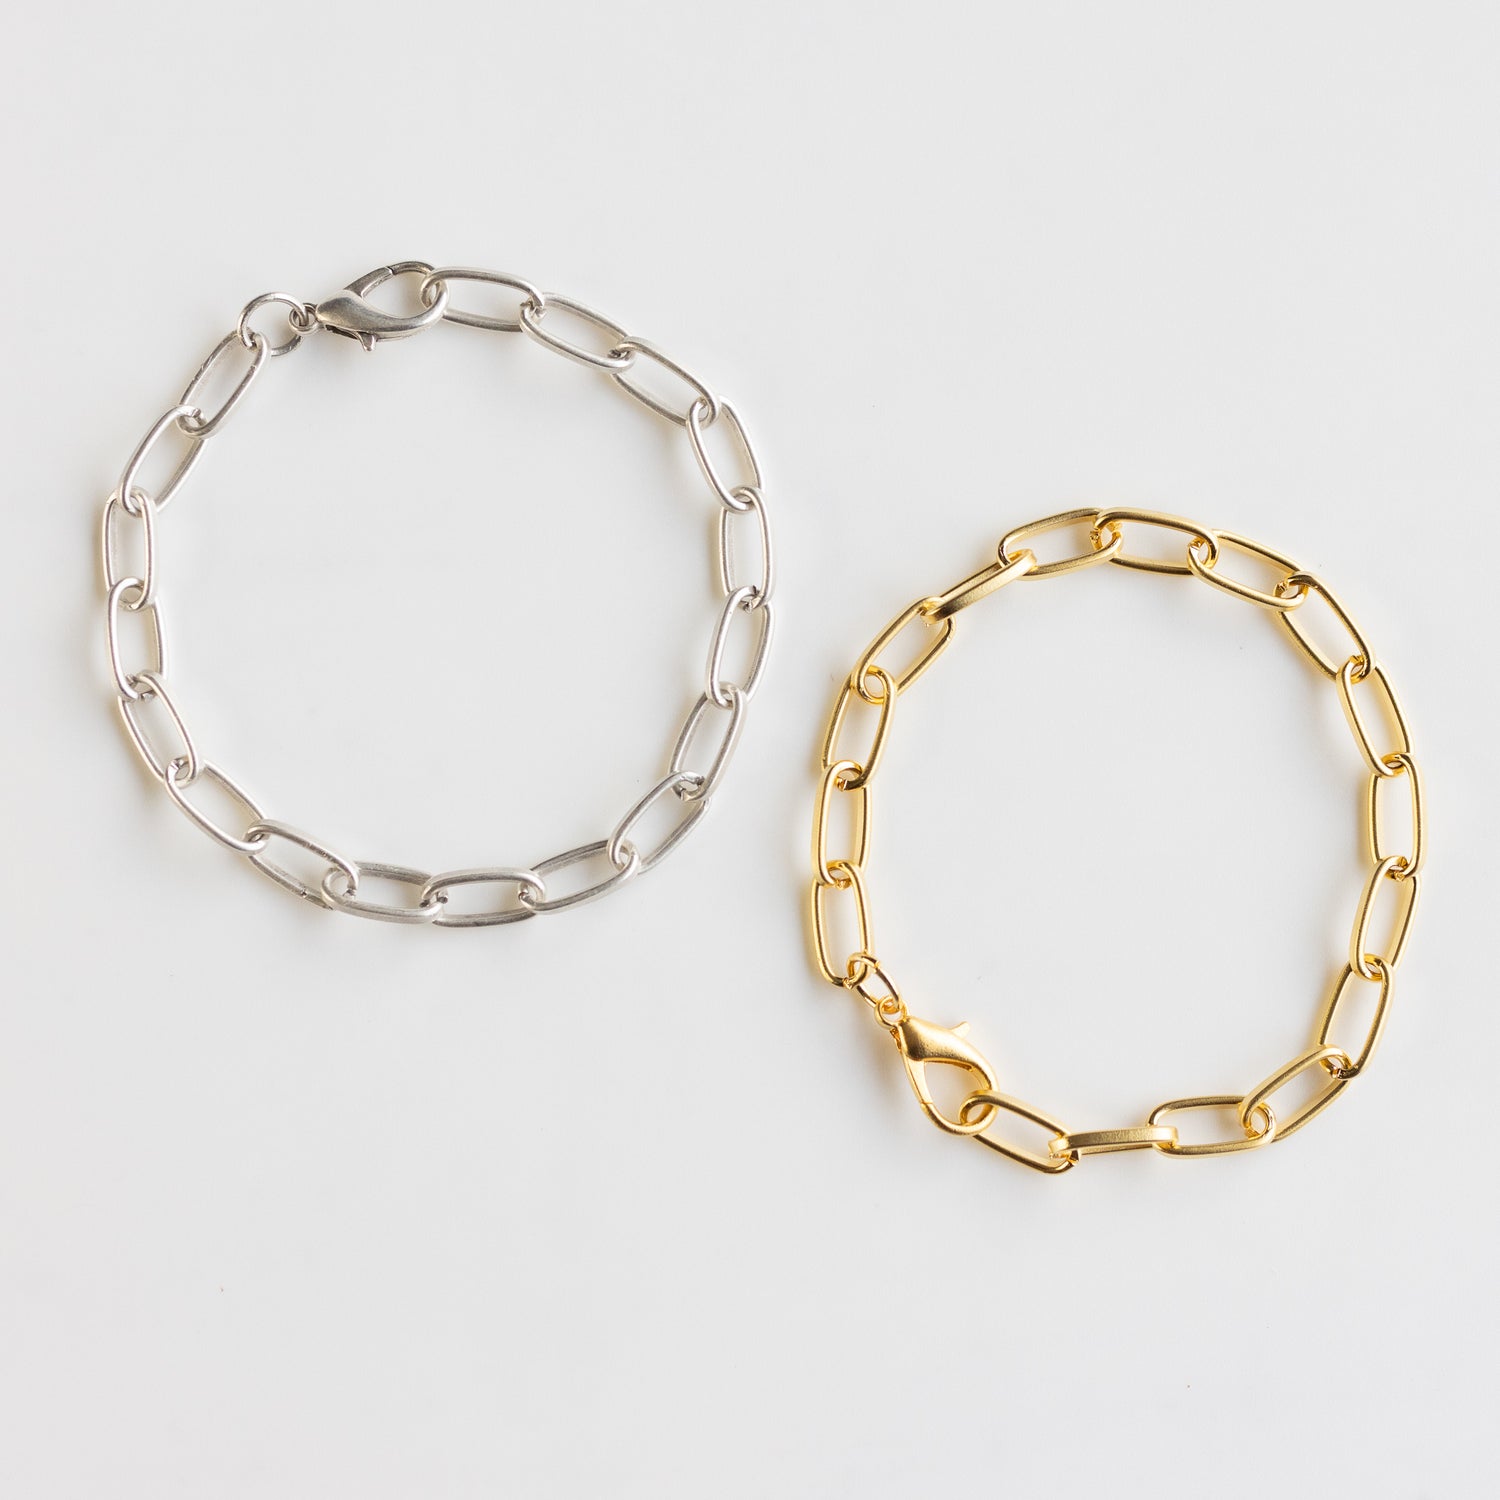 Gold plated chain link bracelet on the right and silver plated chain link bracelet on the left. Great as charm bracelets or alone.